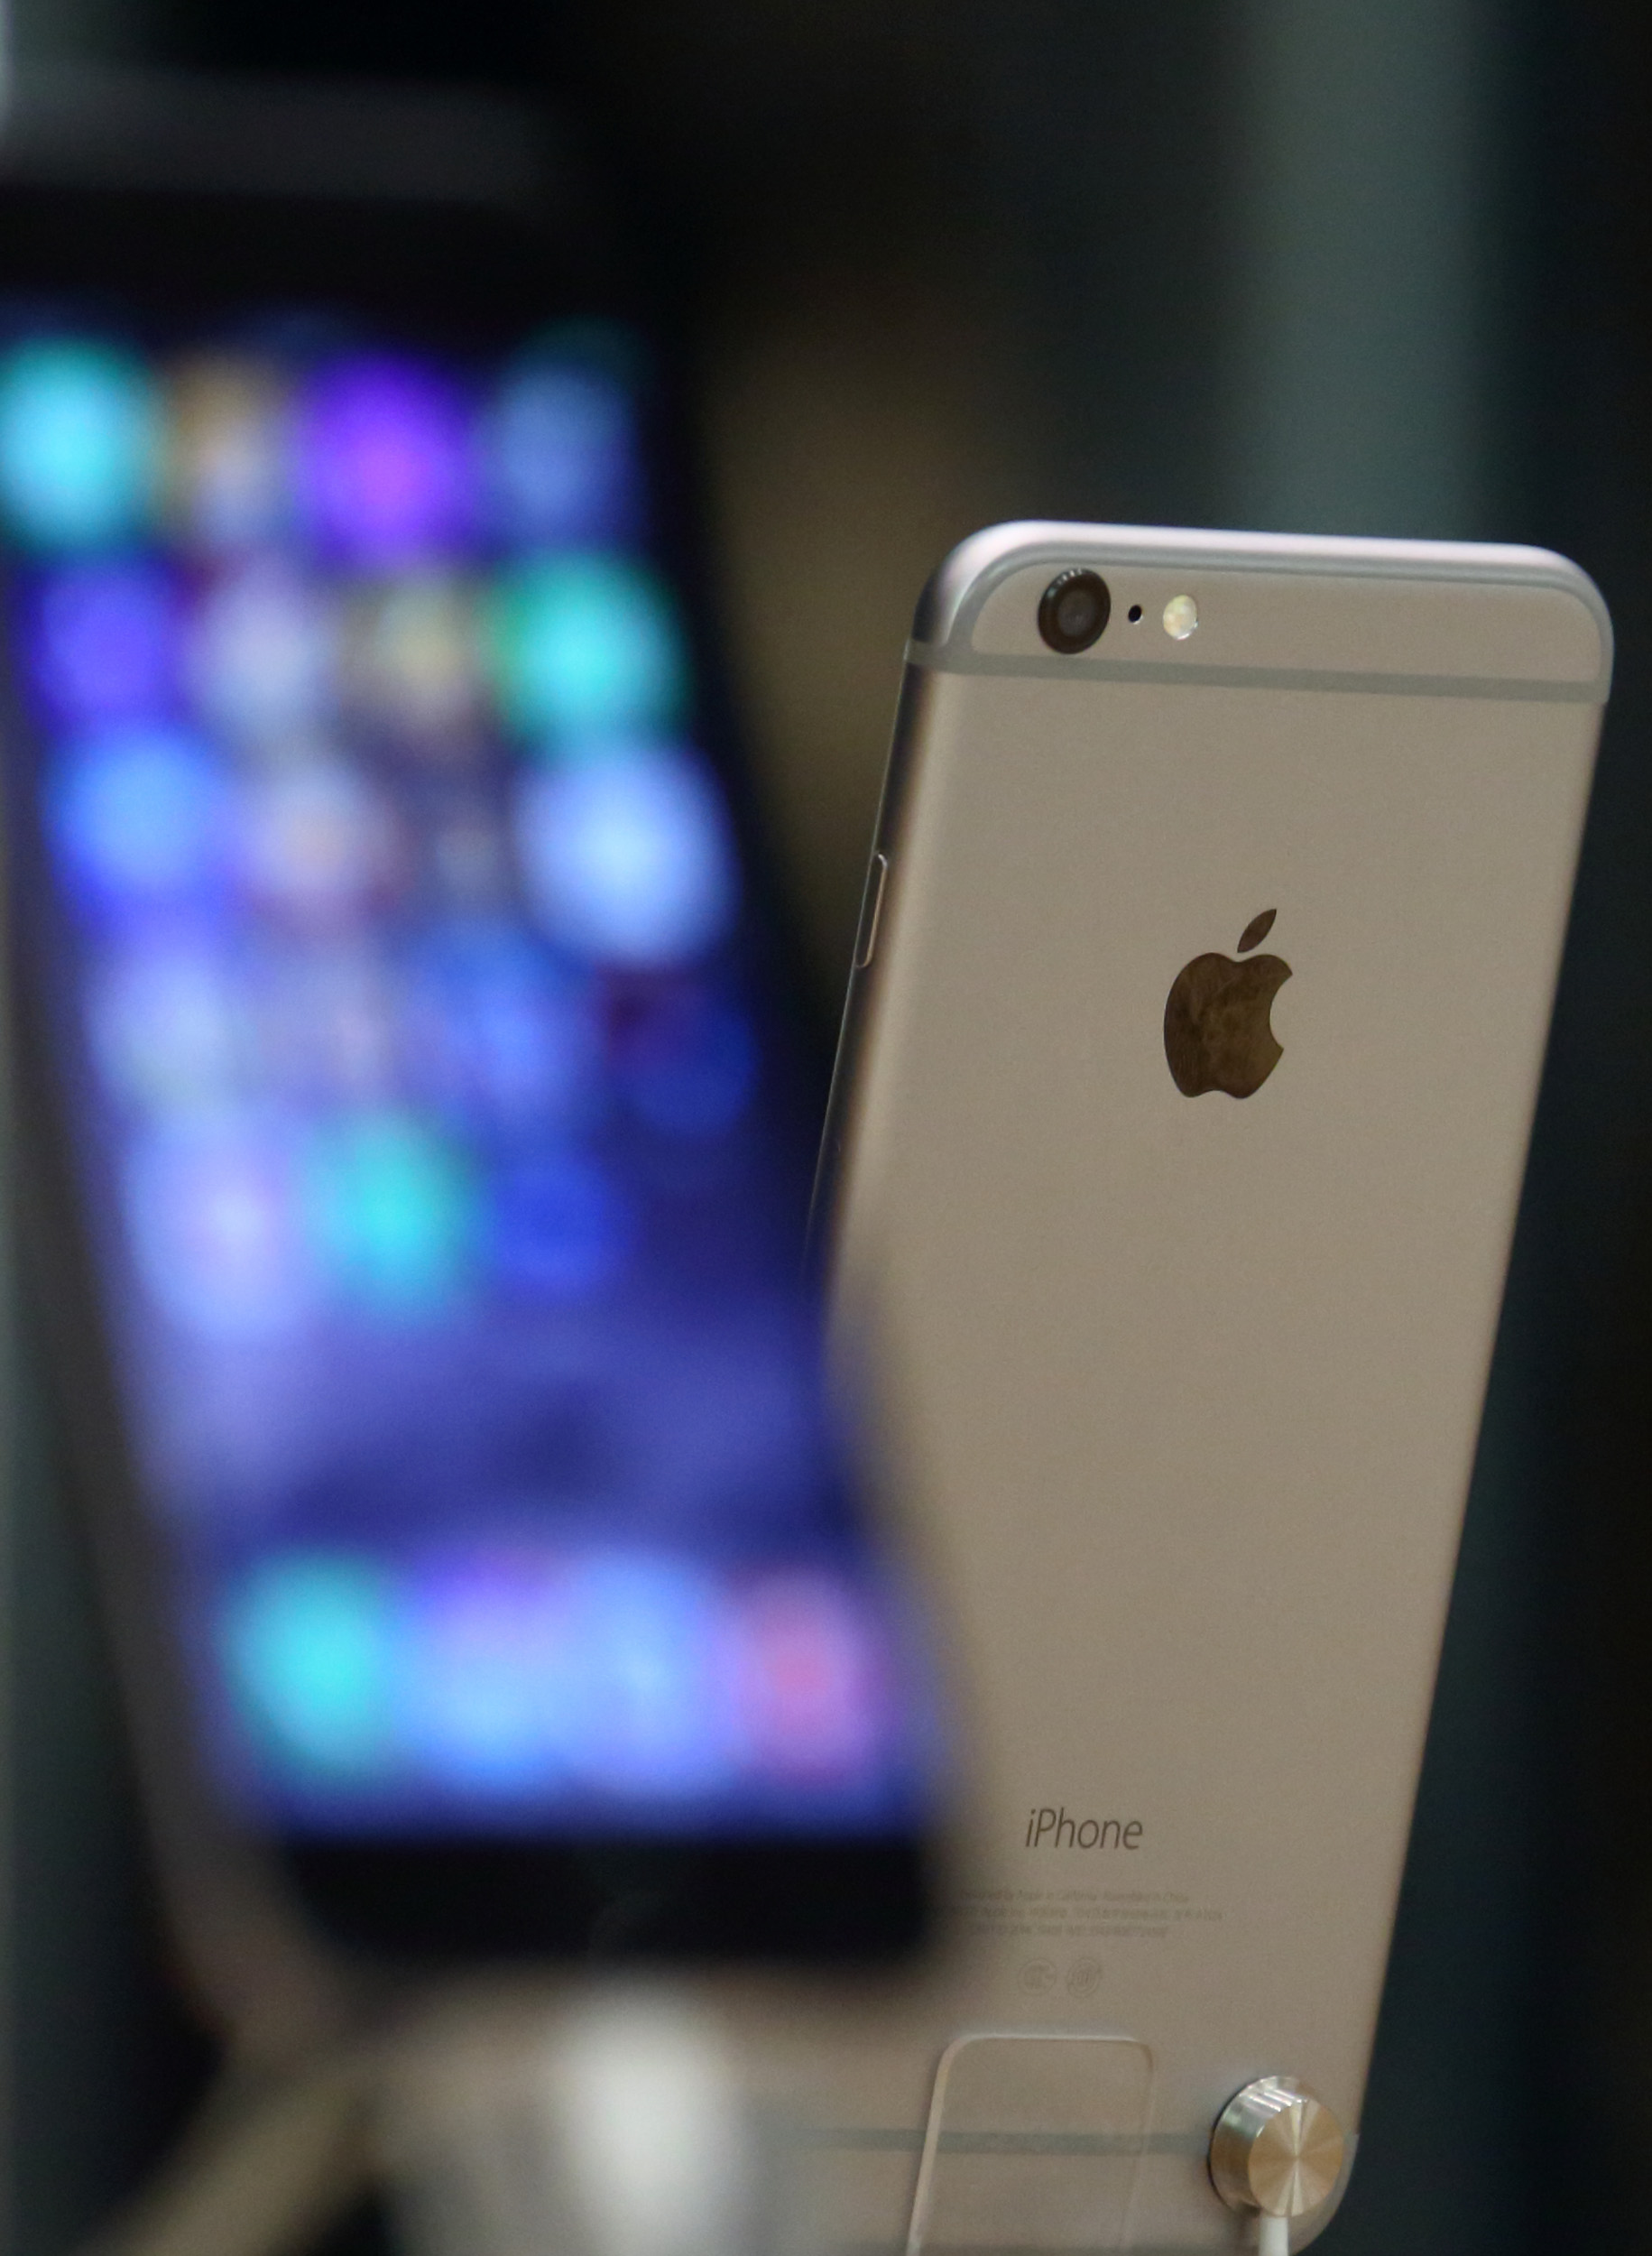 Apple's iPhone 6 is displayed at an Apple store in Beijing, China on Nov. 11, 2014. (Bloomberg—Bloomberg via Getty Images)